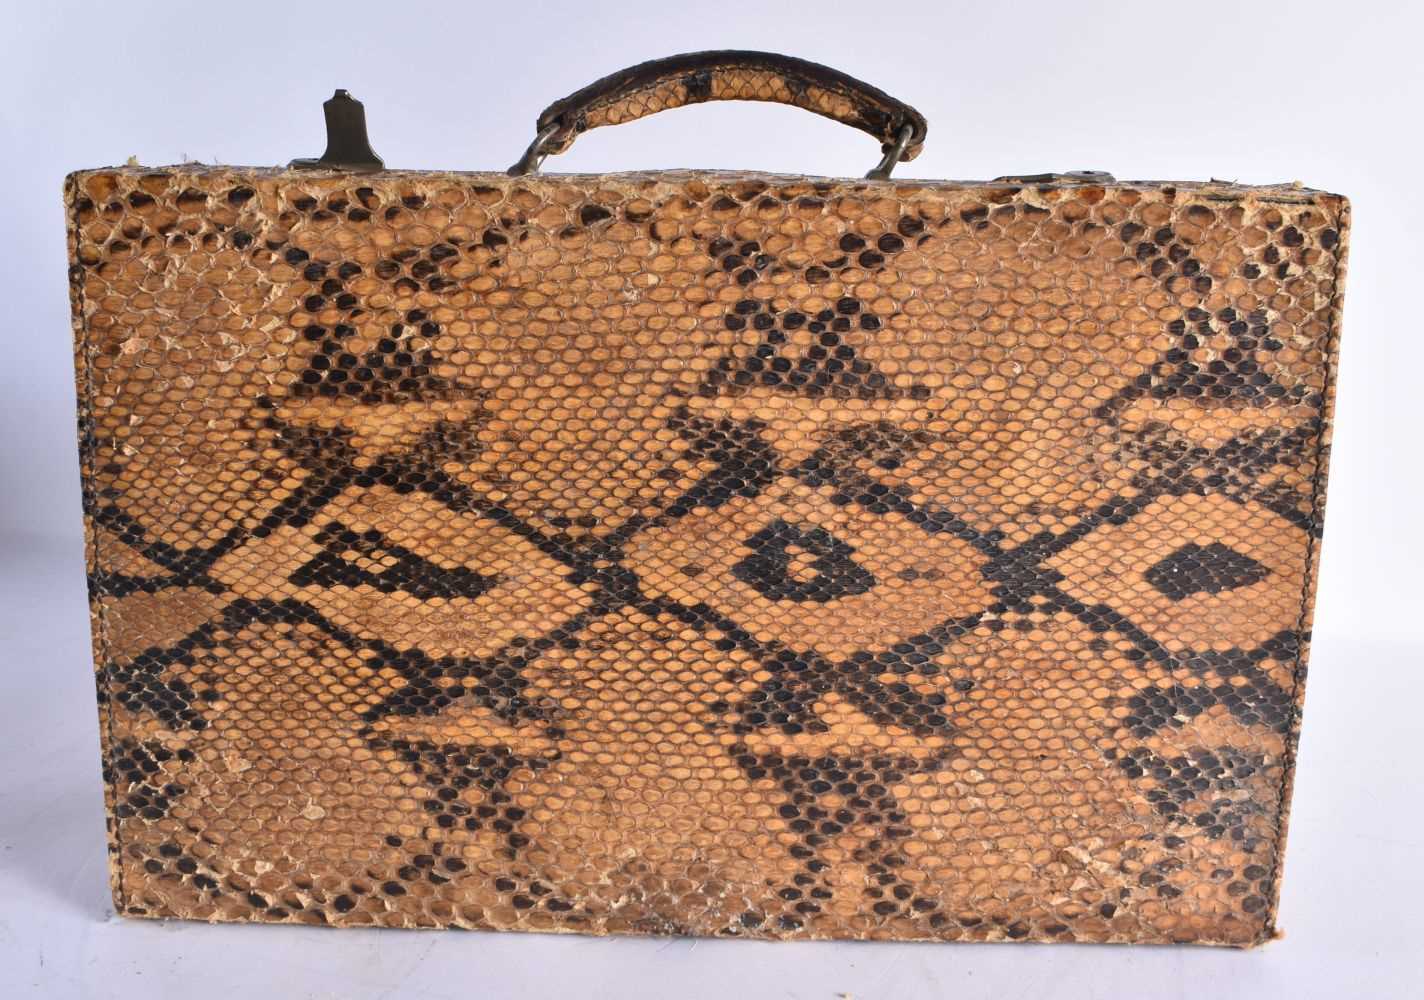 AN ANTIQUE TAXIDERMY WORKED SNAKE SKIN SUITCASE. 44 cm x 30 cm. - Image 7 of 7